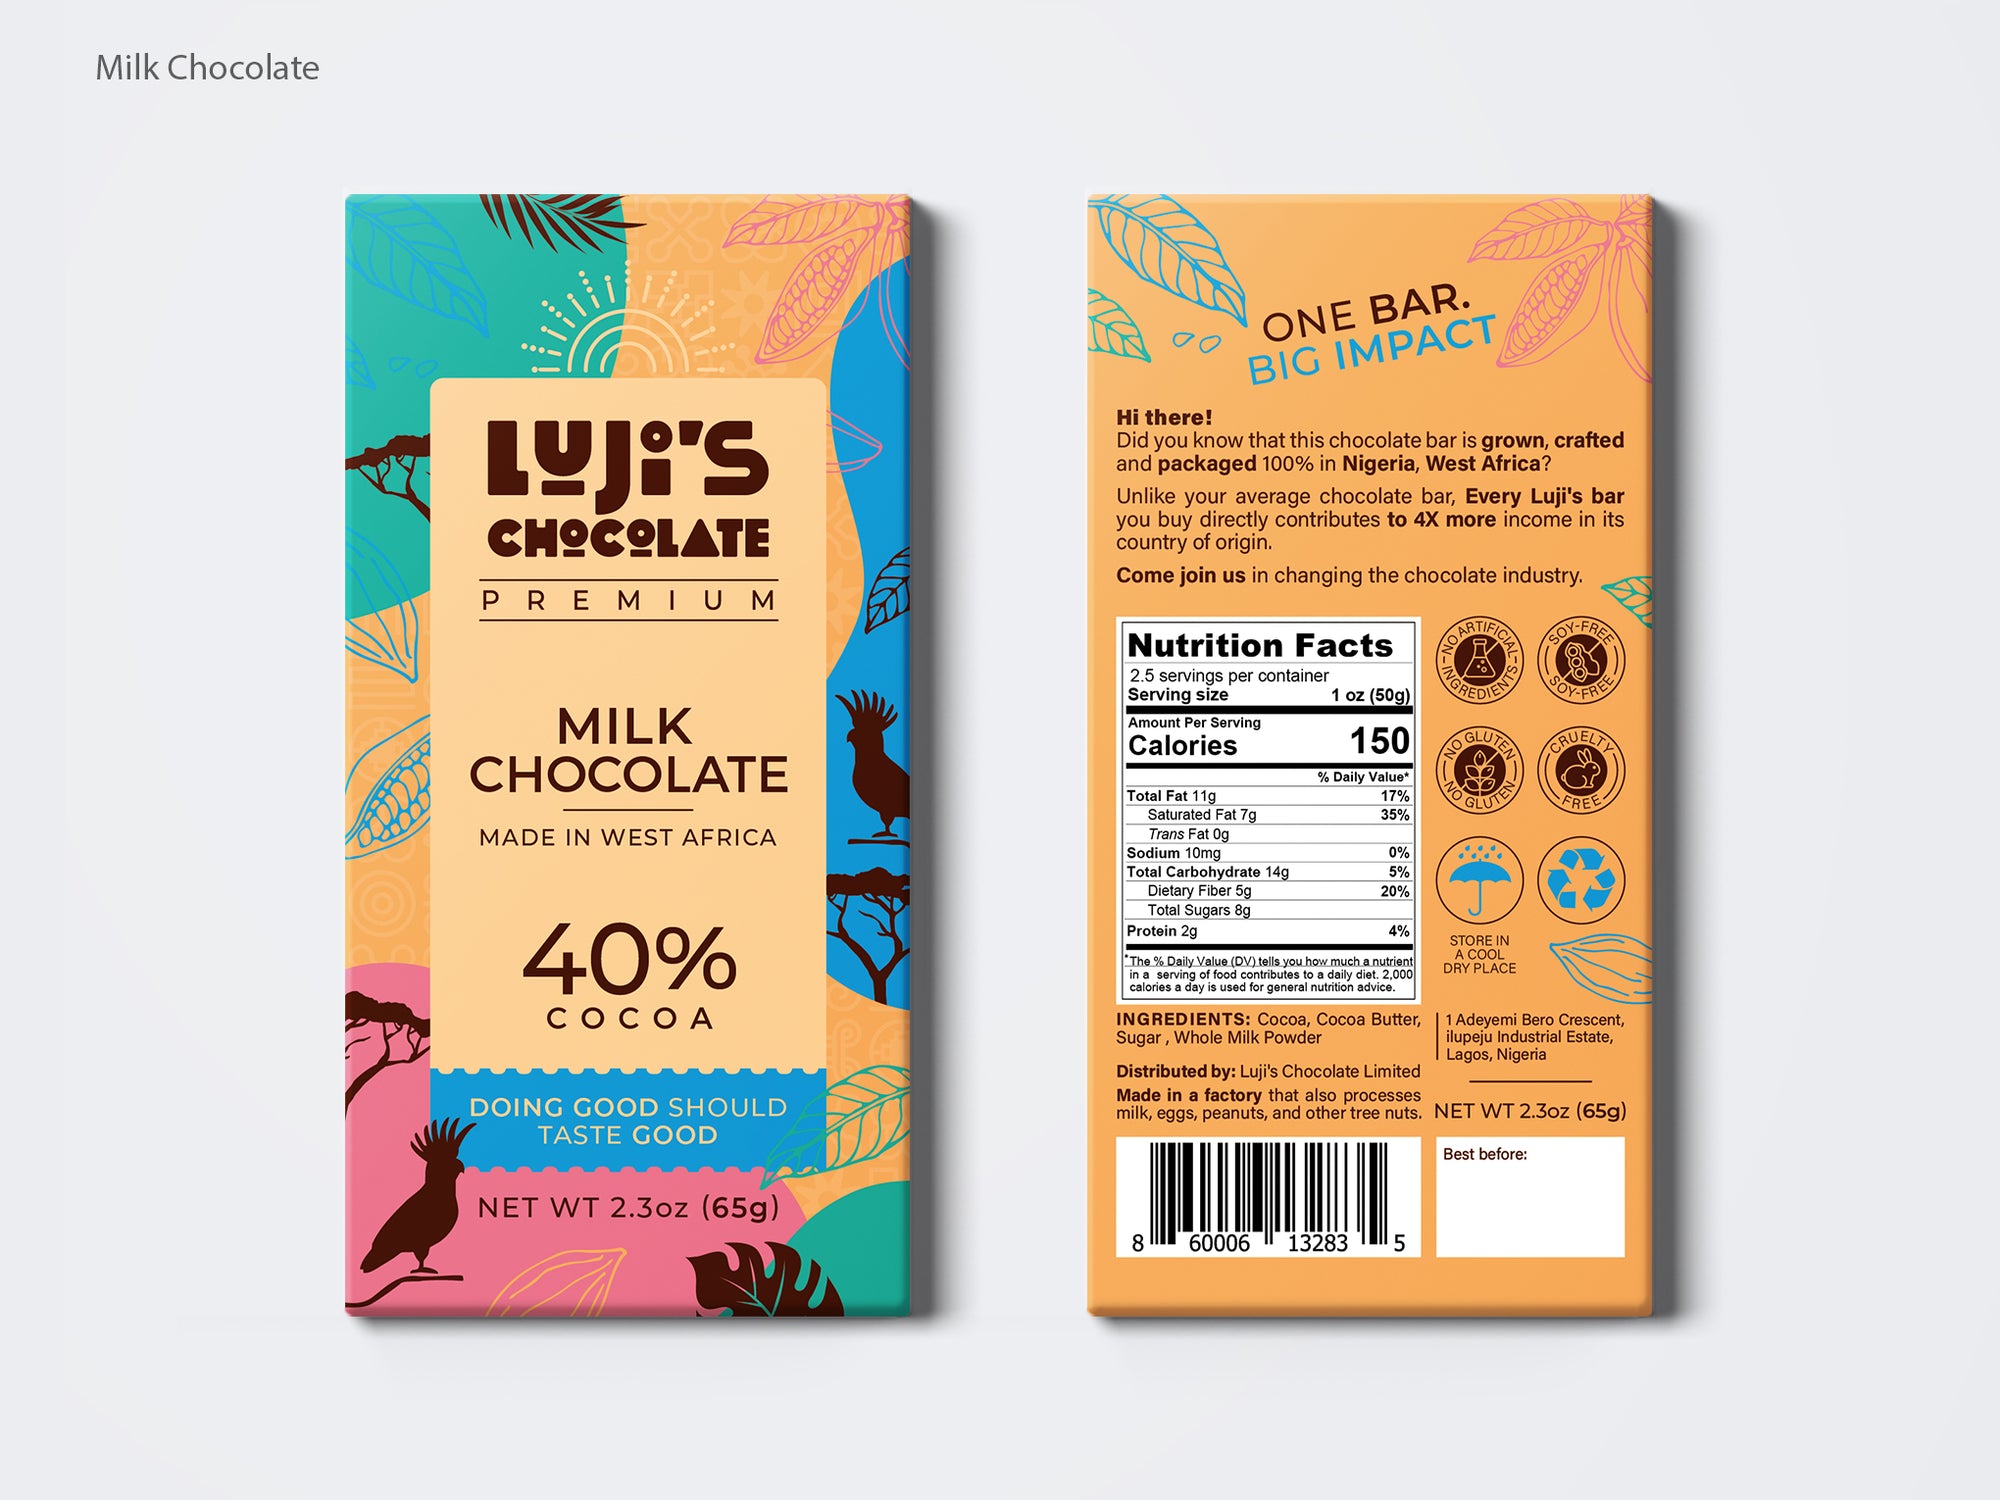 Front and back view of Luji's Milk Chocolate bar packaging with a cream and colorful team and pink design featuring a bird silhouette and cocoa pod illustrations, highlighting '40% Cocoa' and the slogan 'Doing Good Should Taste Good' on the front alongside nutritional facts, ingredients and the company address on the back.